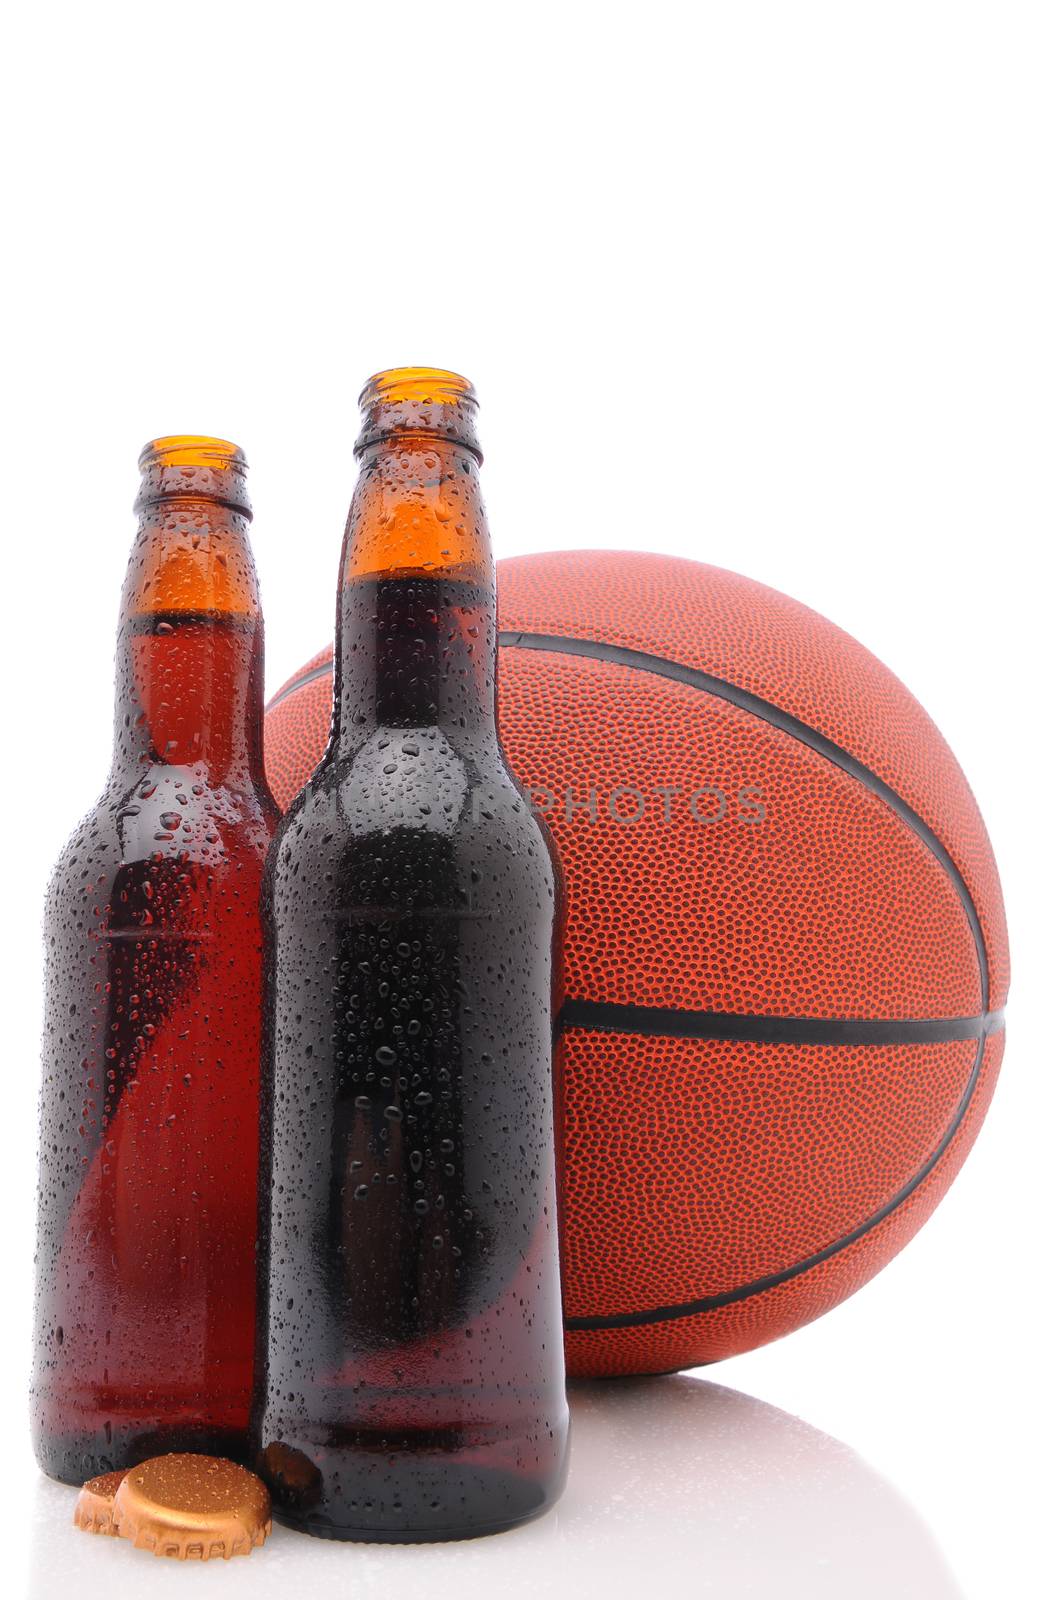 Basketball and two beer bottles by sCukrov